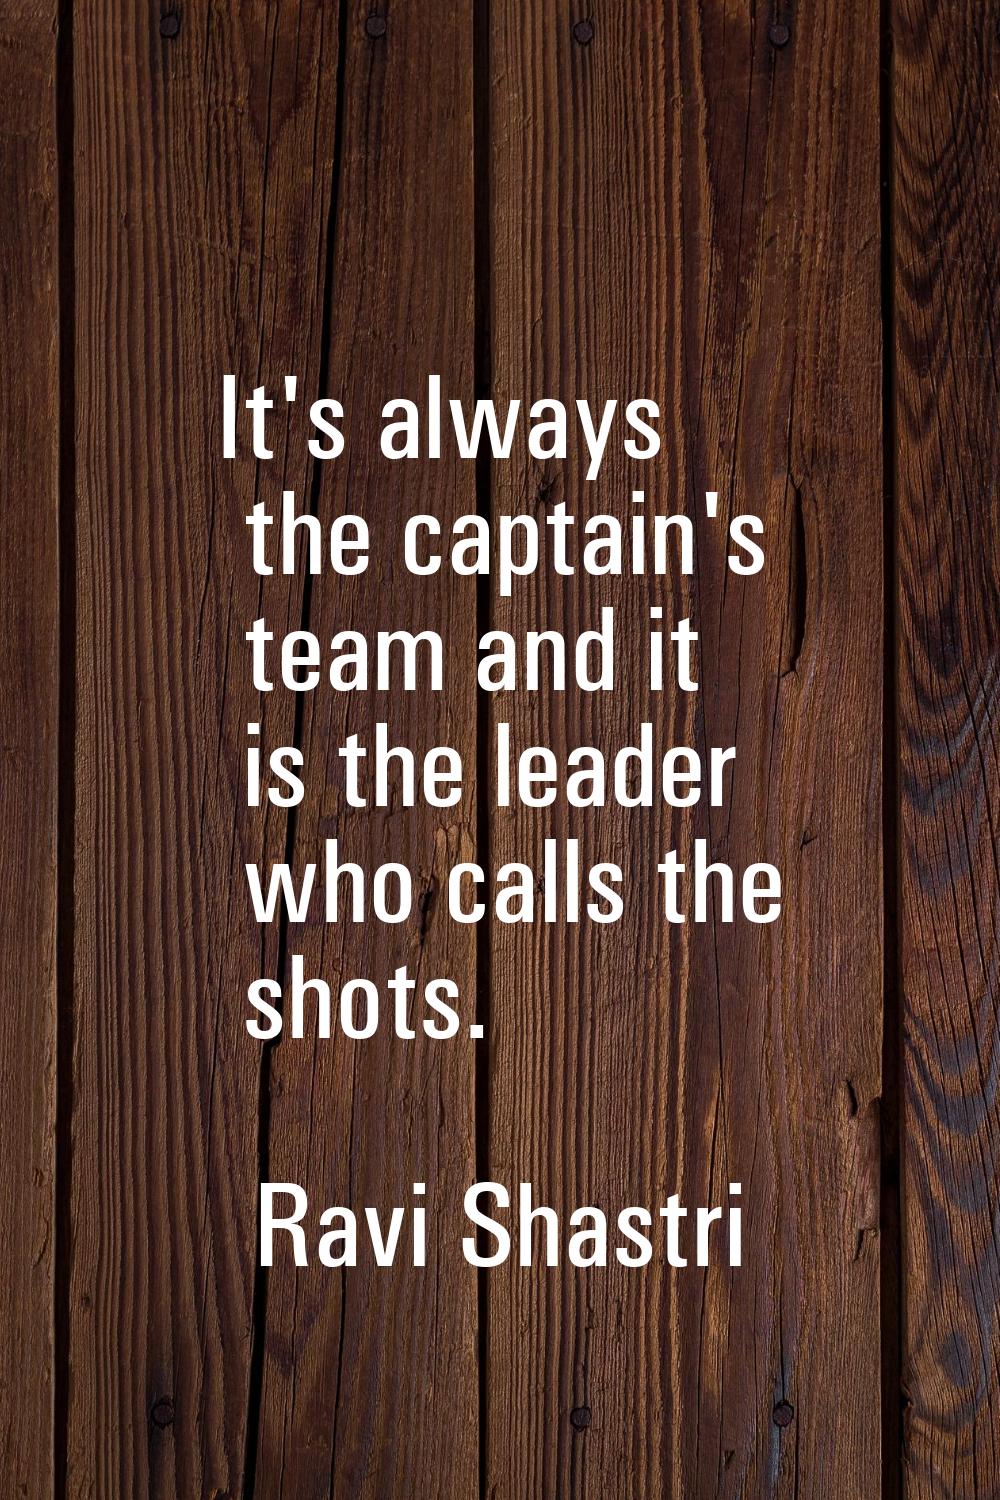 It's always the captain's team and it is the leader who calls the shots.